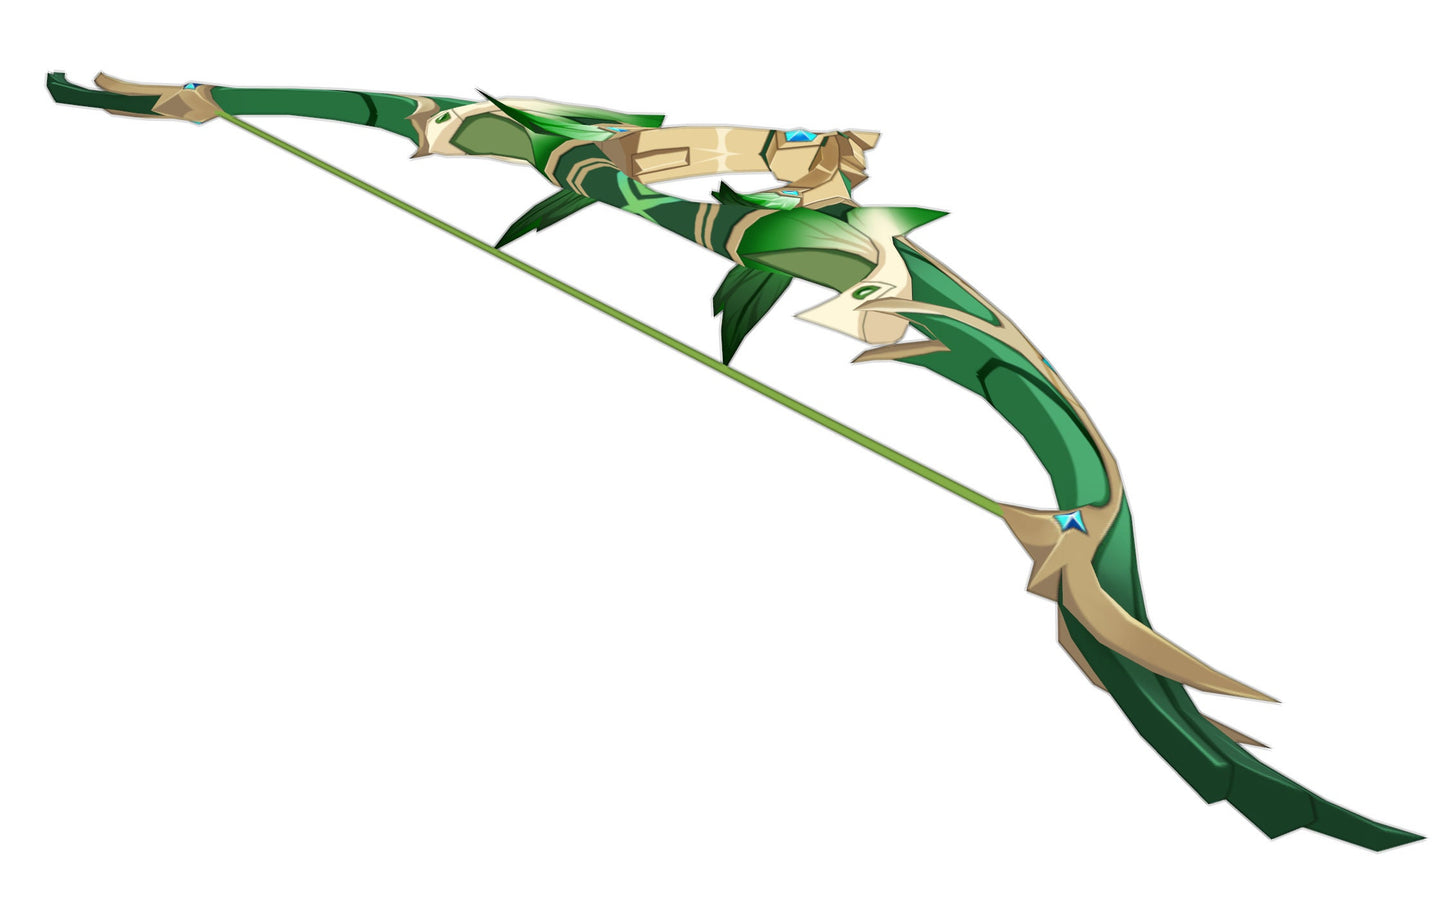 Viridescent Hunt - Digital 3D Model Files and Physical 3D Printed Kit Options - Viridescent Hunt Bow - Childe Cosplay